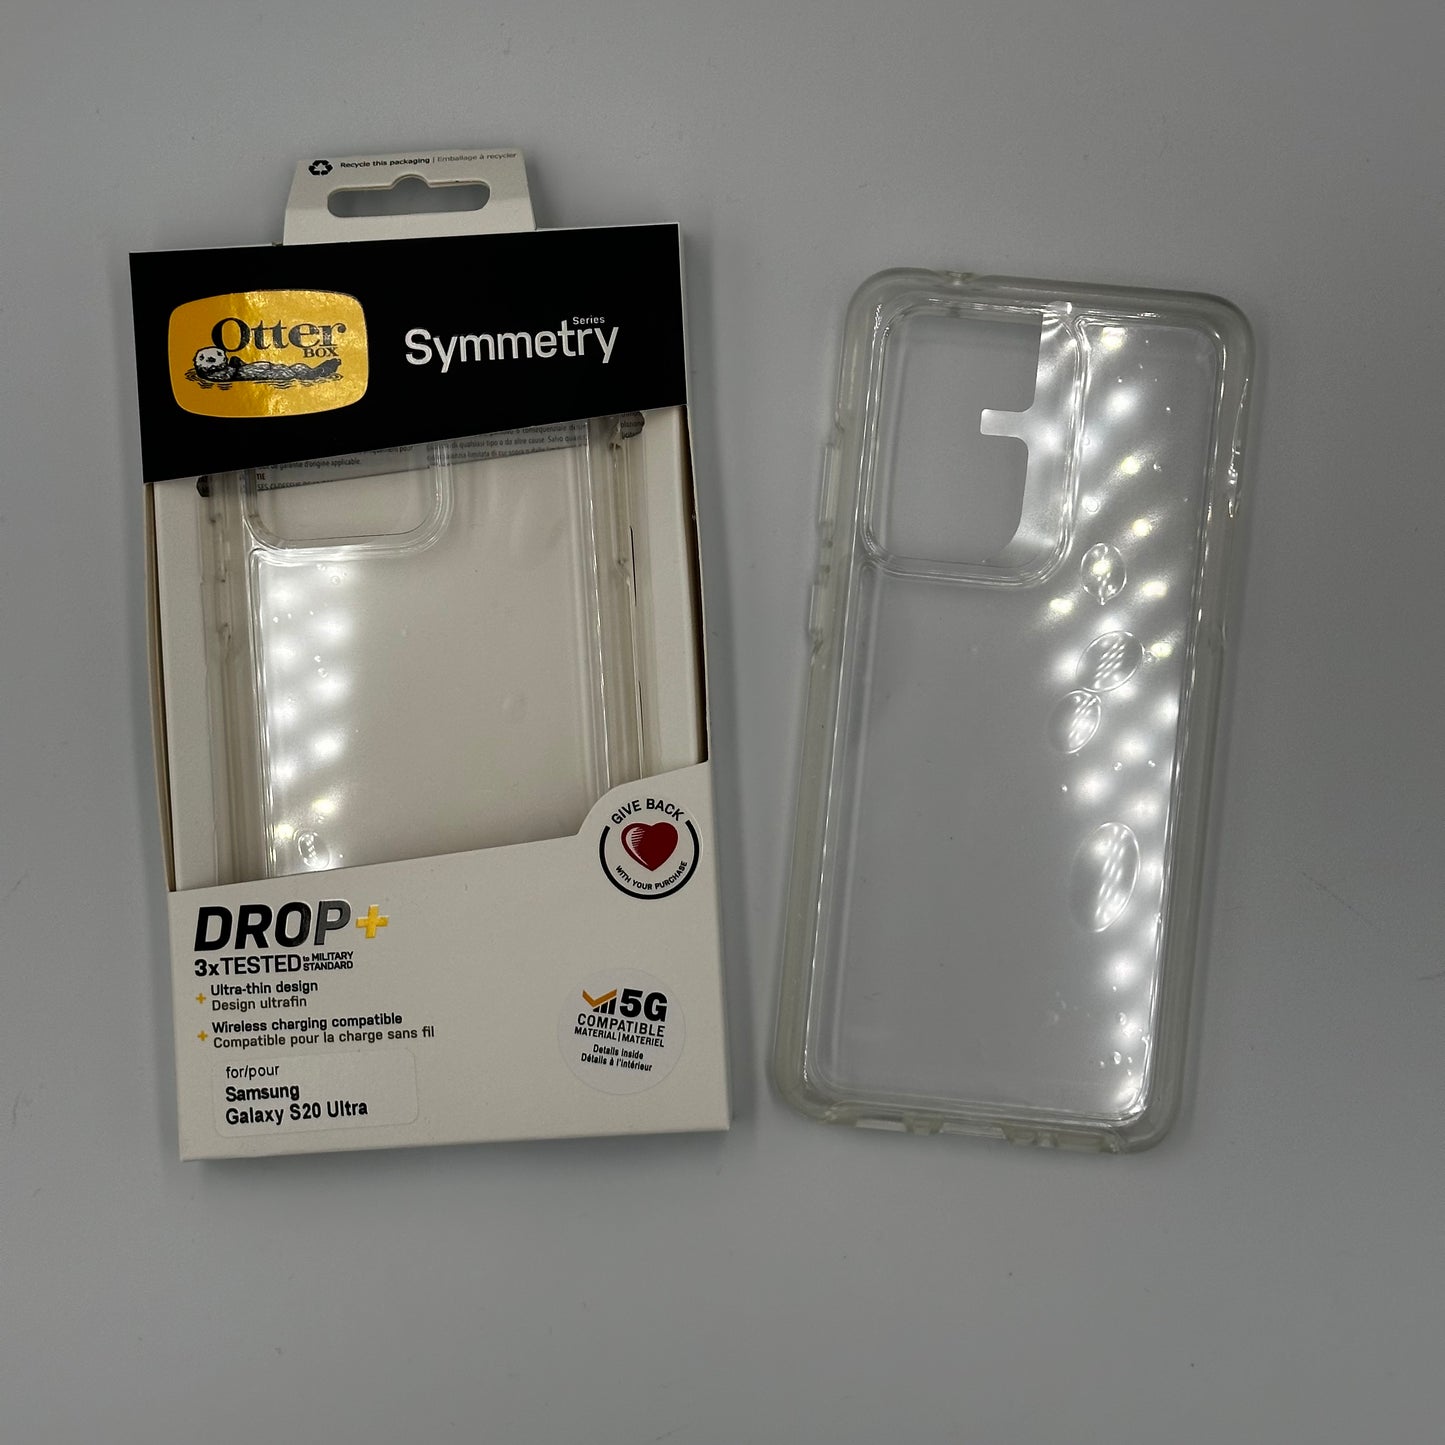 Otterbox Cases - Samsung Galaxy S20 Series - S20 Ultra, S20 Plus, S20